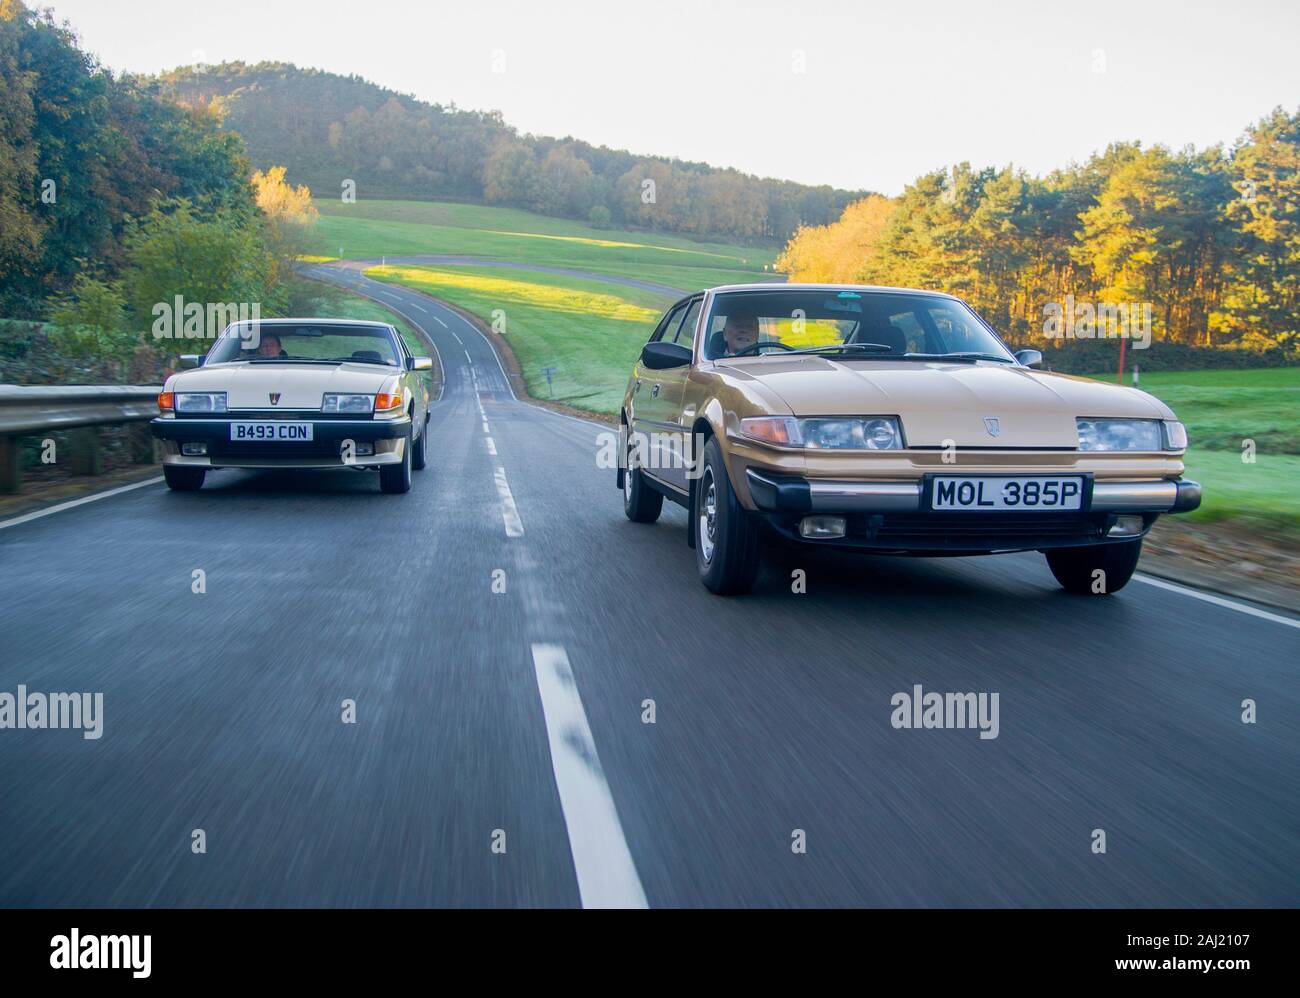 Rover SD1 cars driving together - 1985 2.4 diesel (left) and 1976 3500 V8 (right), classic British cars Stock Photo